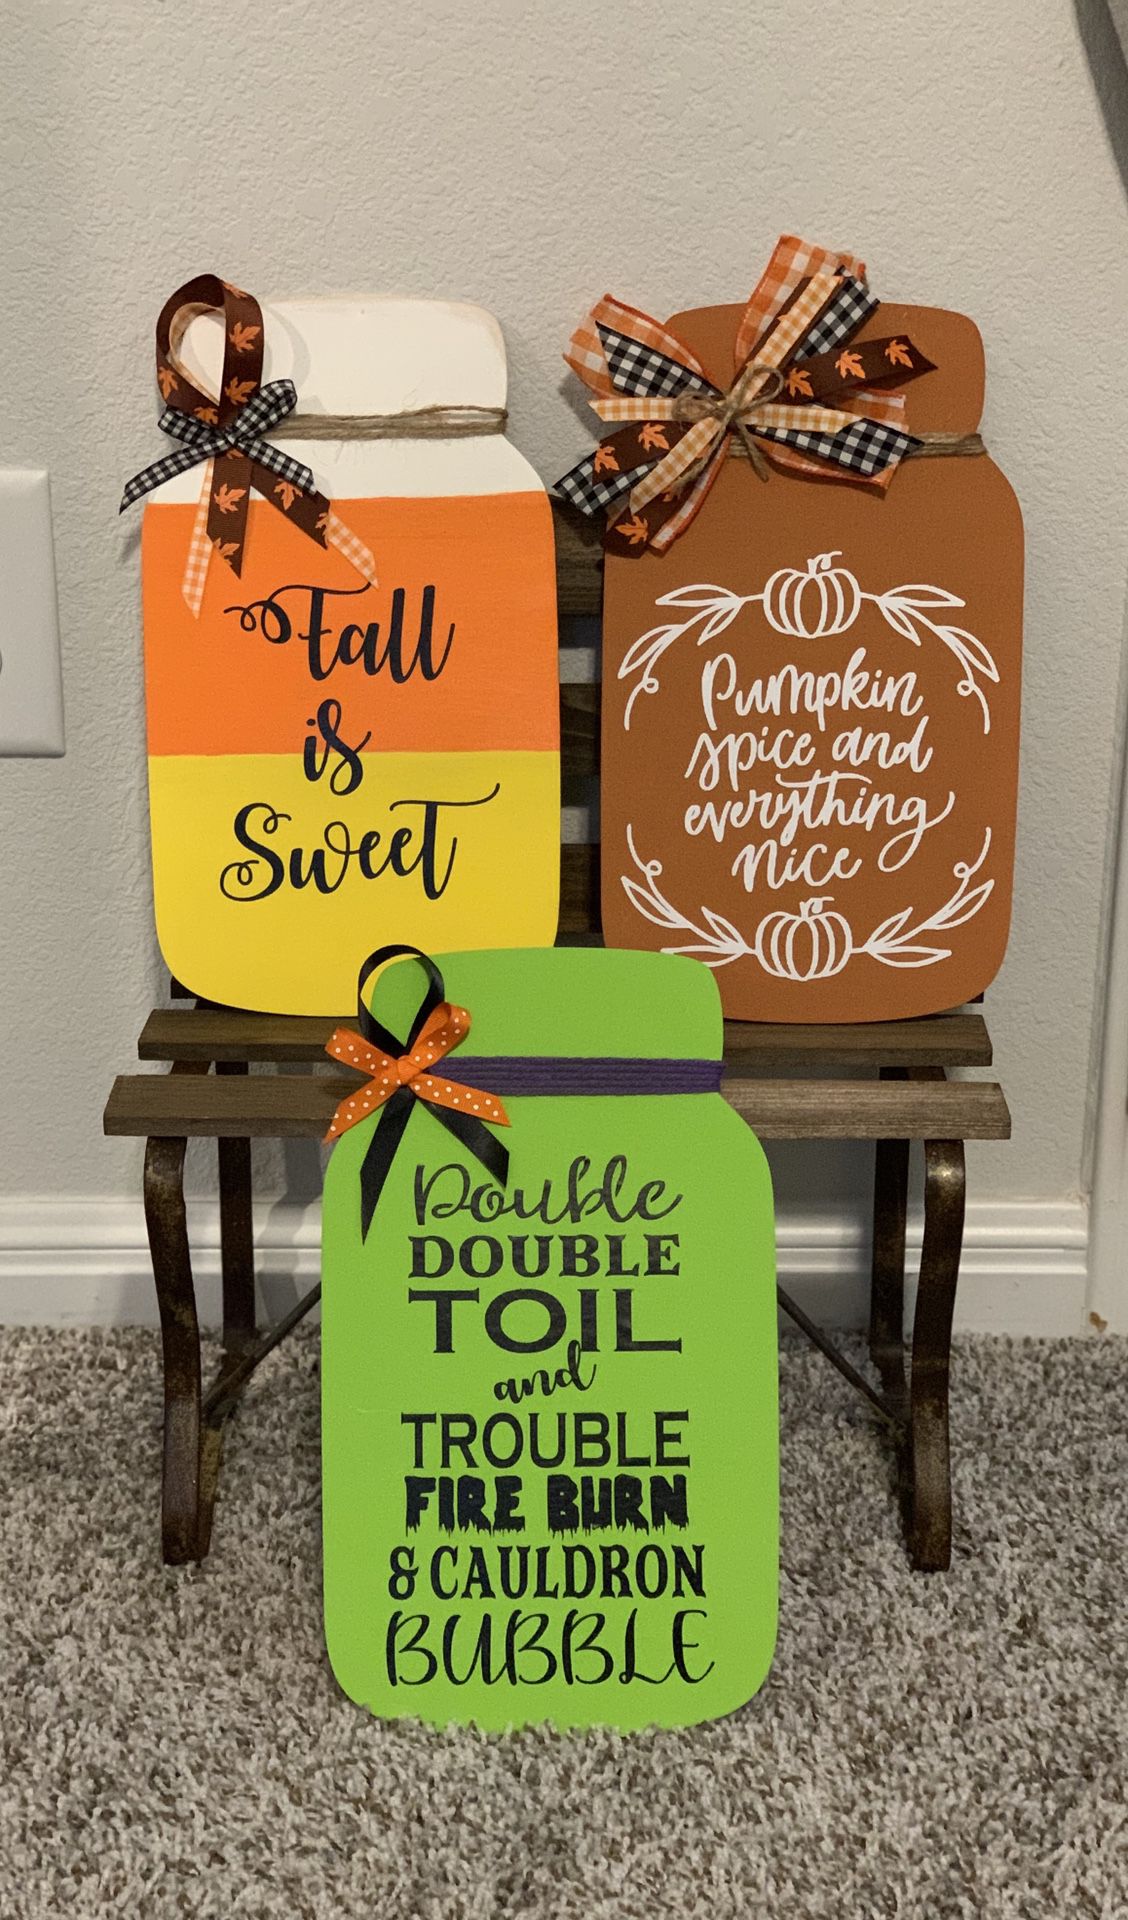 Handmade signs for fall and Halloween